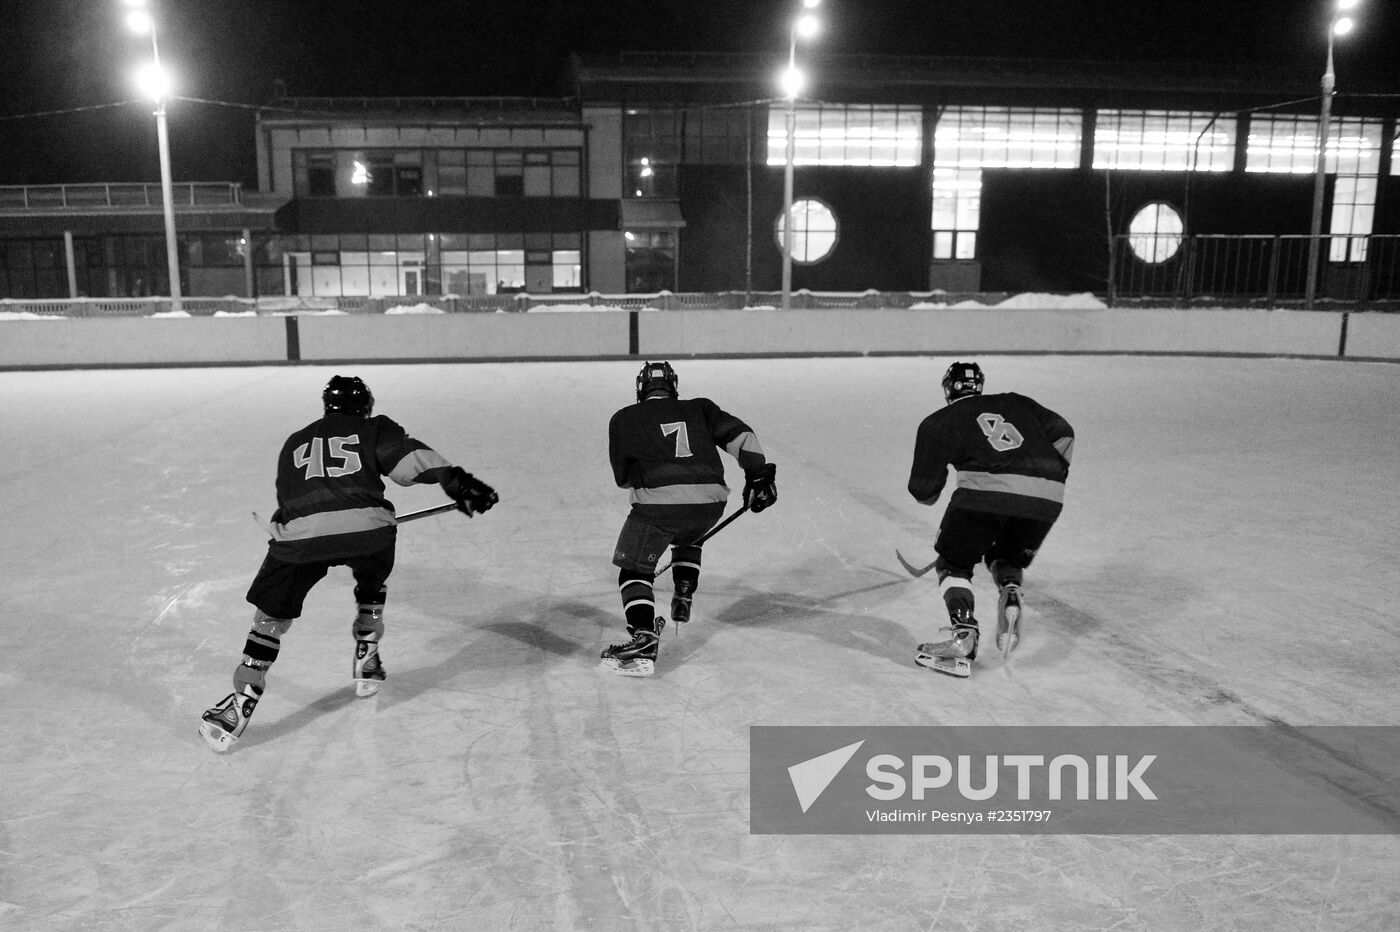 Amateur ice hockey teams compete in outdoor match